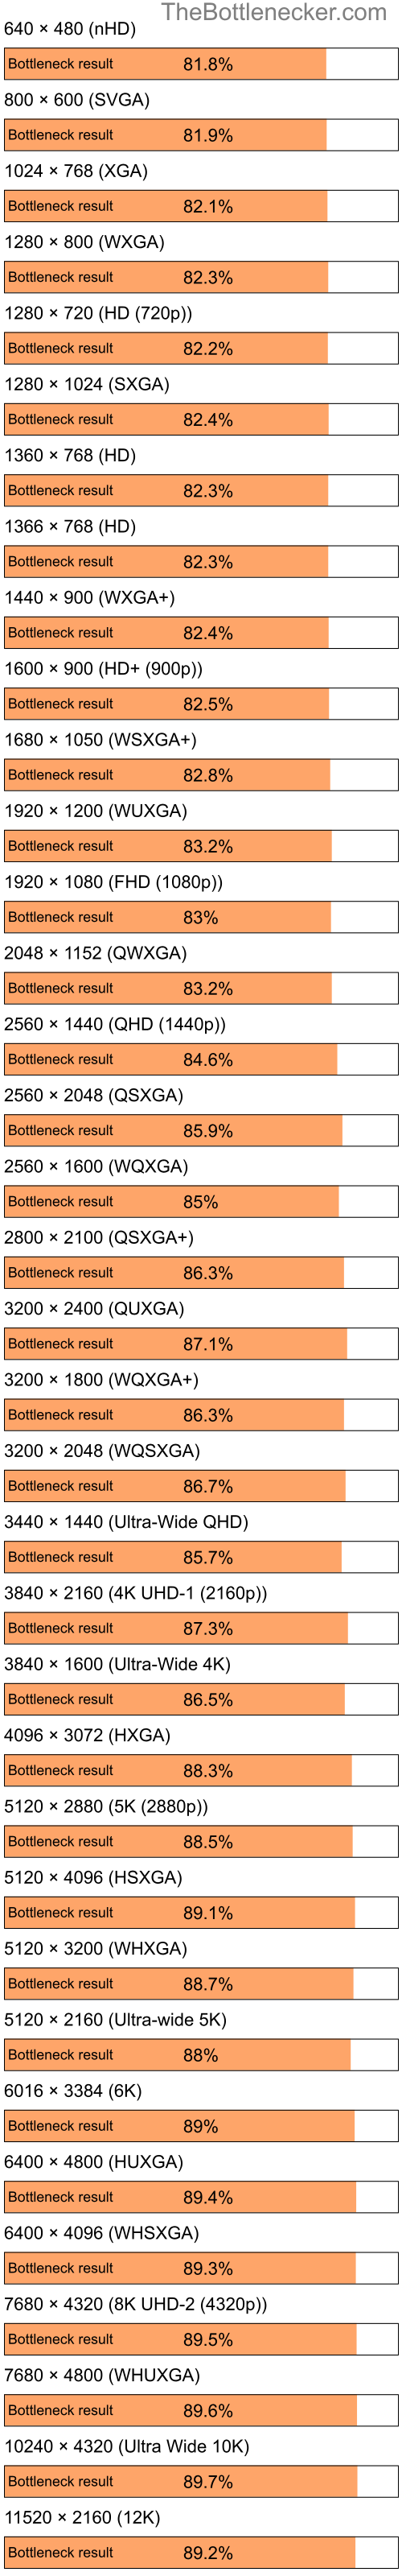 Bottleneck results by resolution for Intel Atom Z520 and AMD Radeon X1270 in Graphic Card Intense Tasks